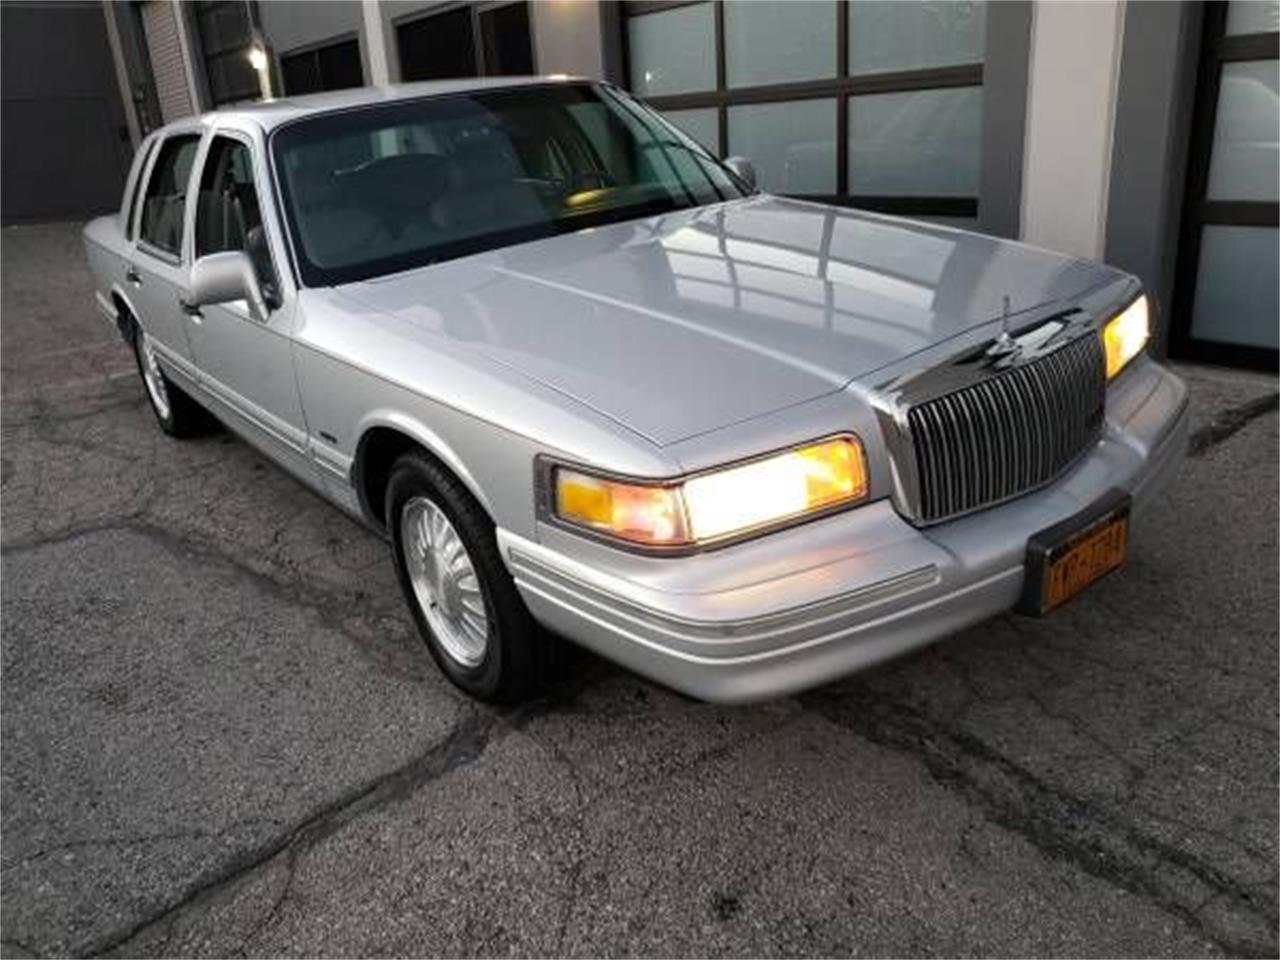 1997 Lincoln Continental for Sale | ClassicCars.com | CC-1415150